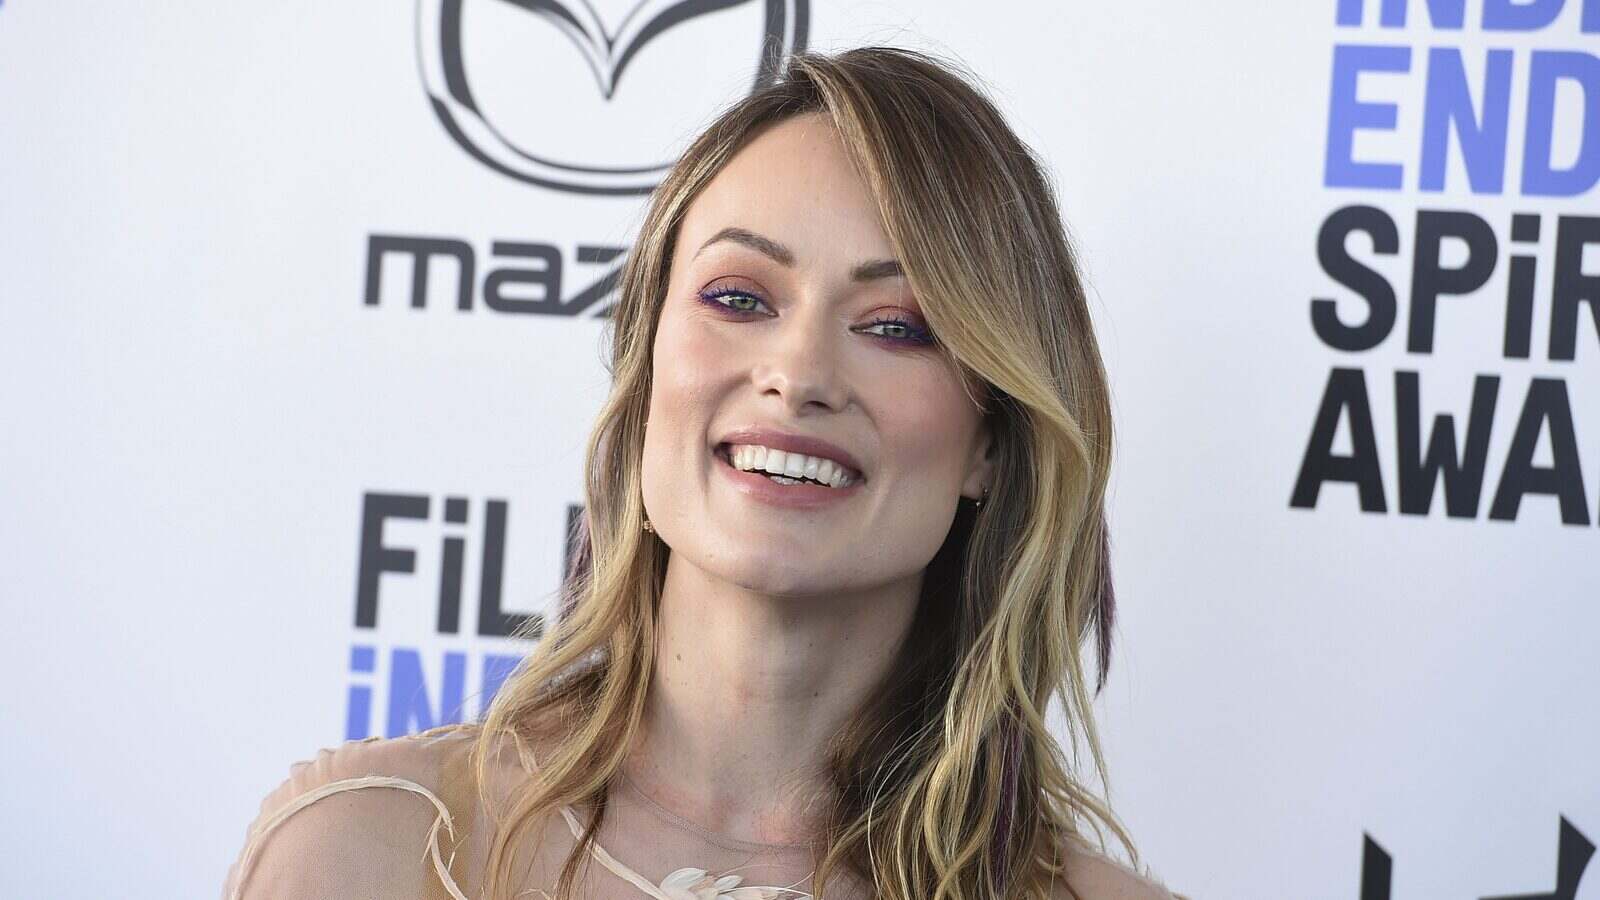 Olivia Wilde intentionally used sex scenes in Don't Worry Darling